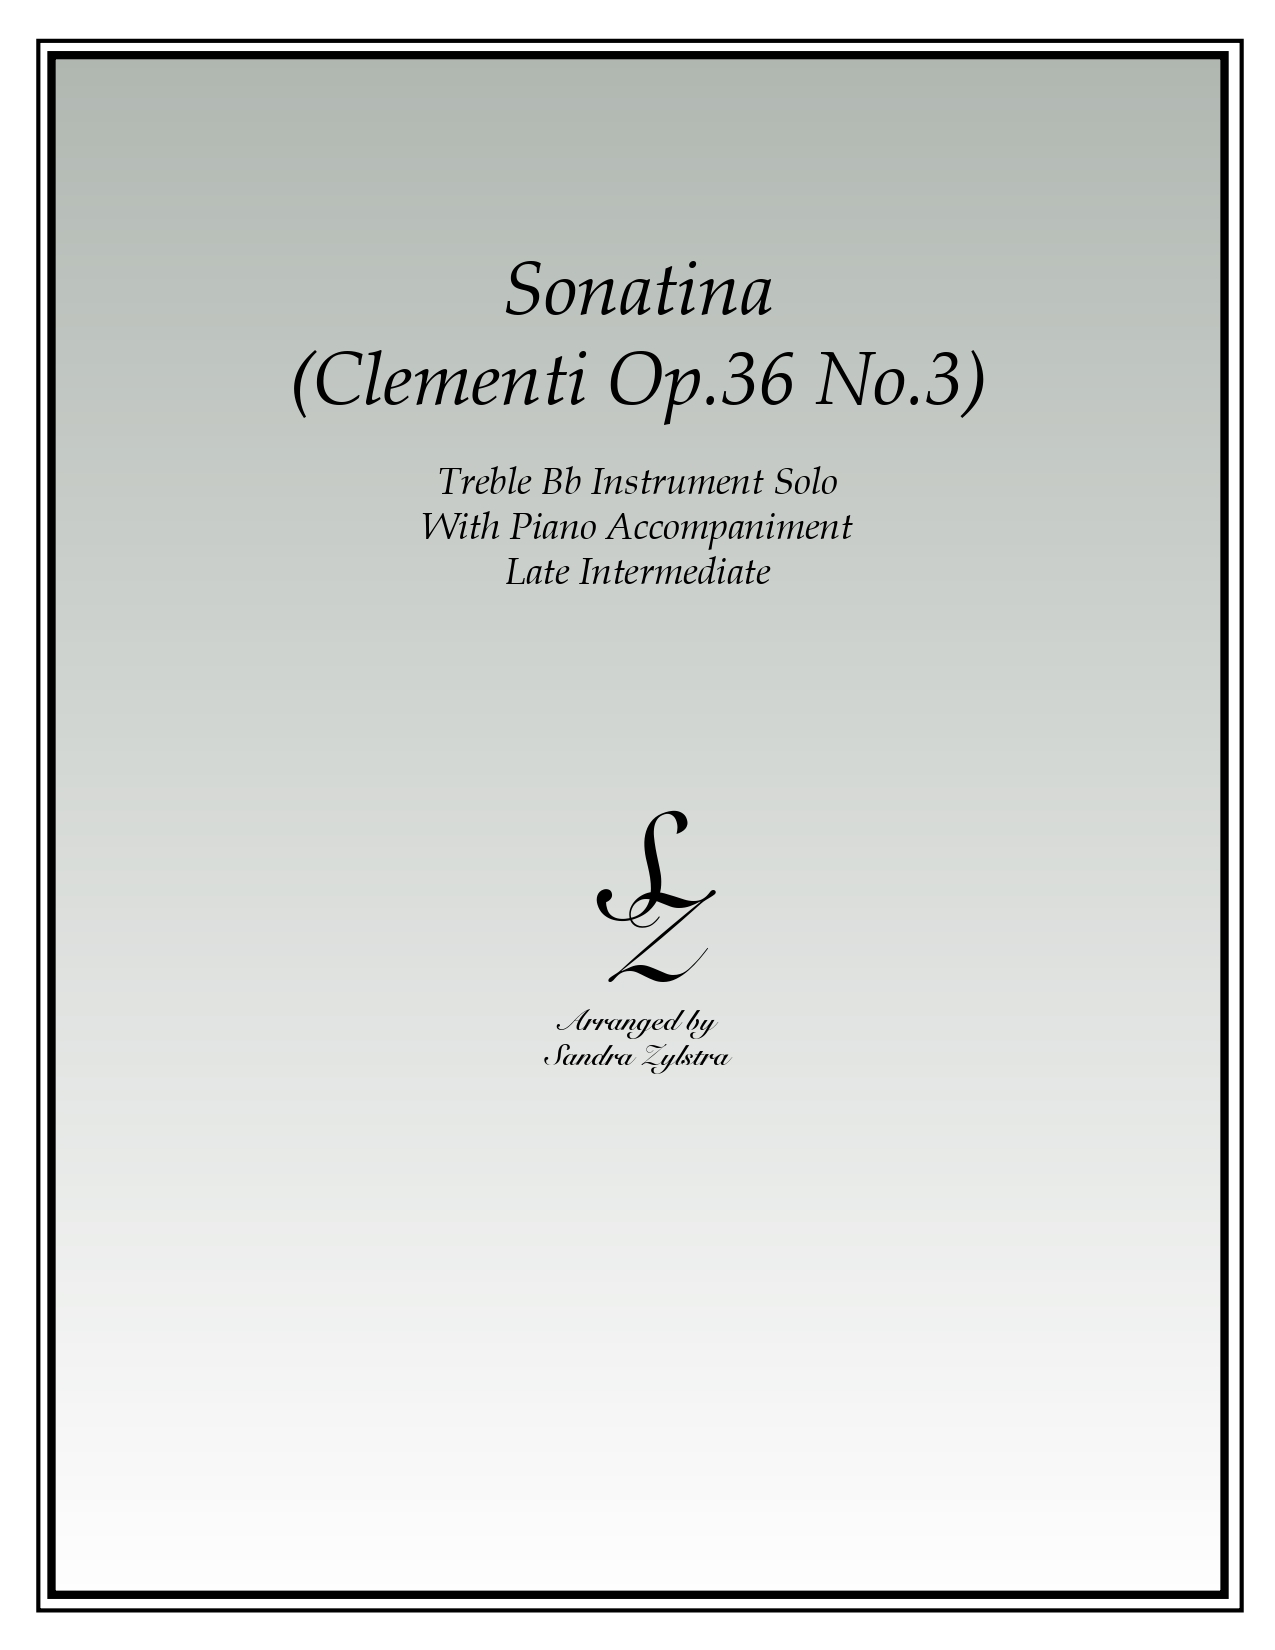 Sonatina Op. 36 No. 3 Clementi Bb instrument solo part cover page 00011